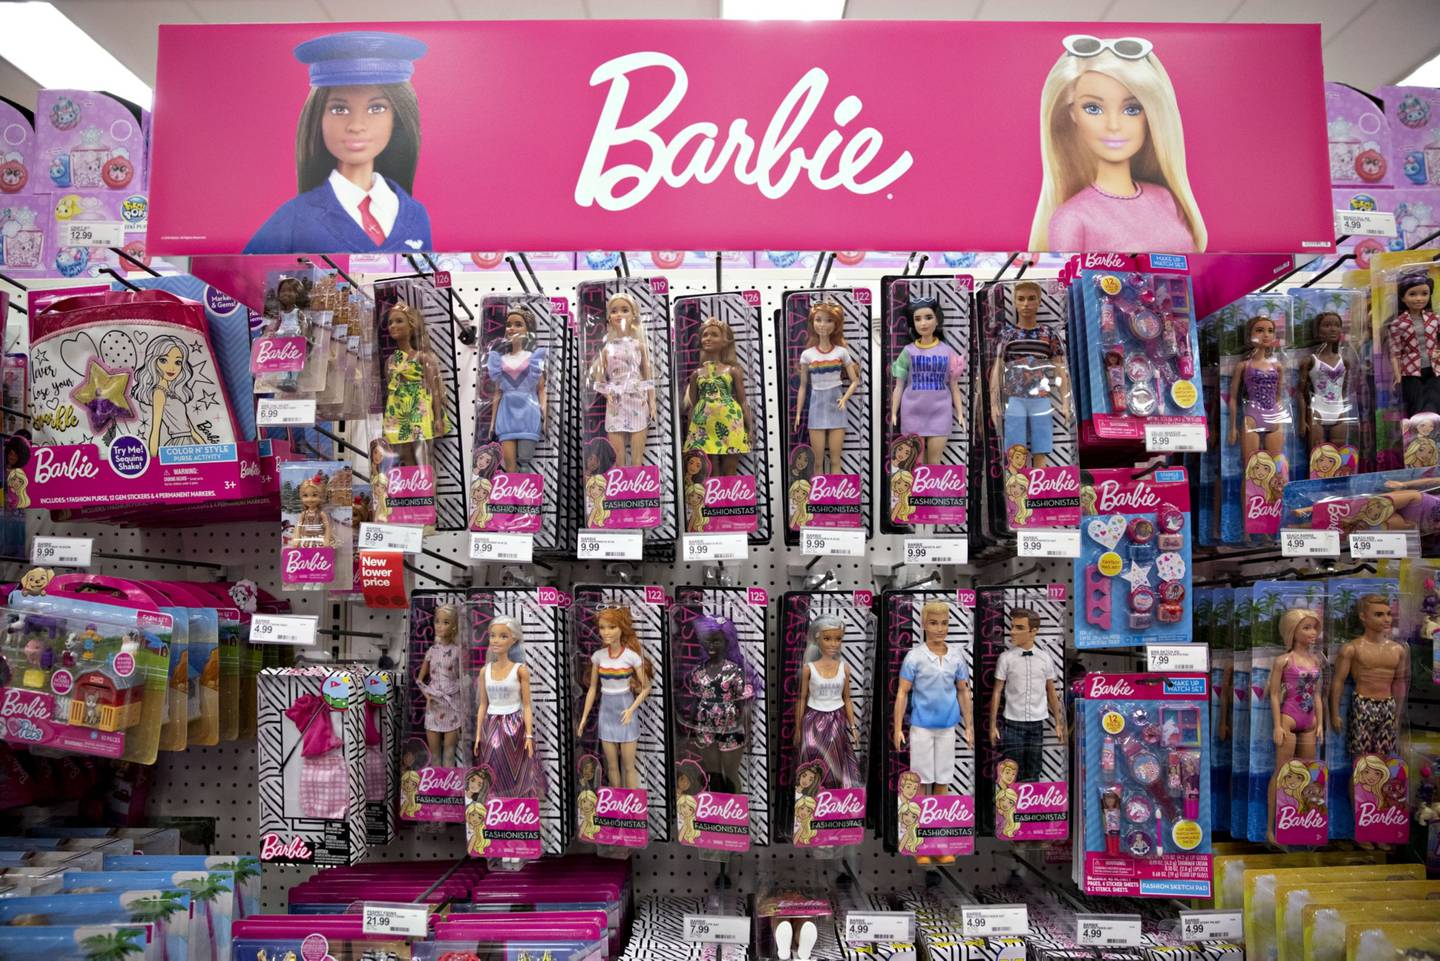 Mattel Inc. Barbie brand dolls hang on display at a Target Corp. store in Chicago, Illinois, U.S., on Saturday, Nov. 16, 2019. Target Corp. is scheduled to release earnings figures on November 20. Photographer: Daniel Acker/Bloombergdfd